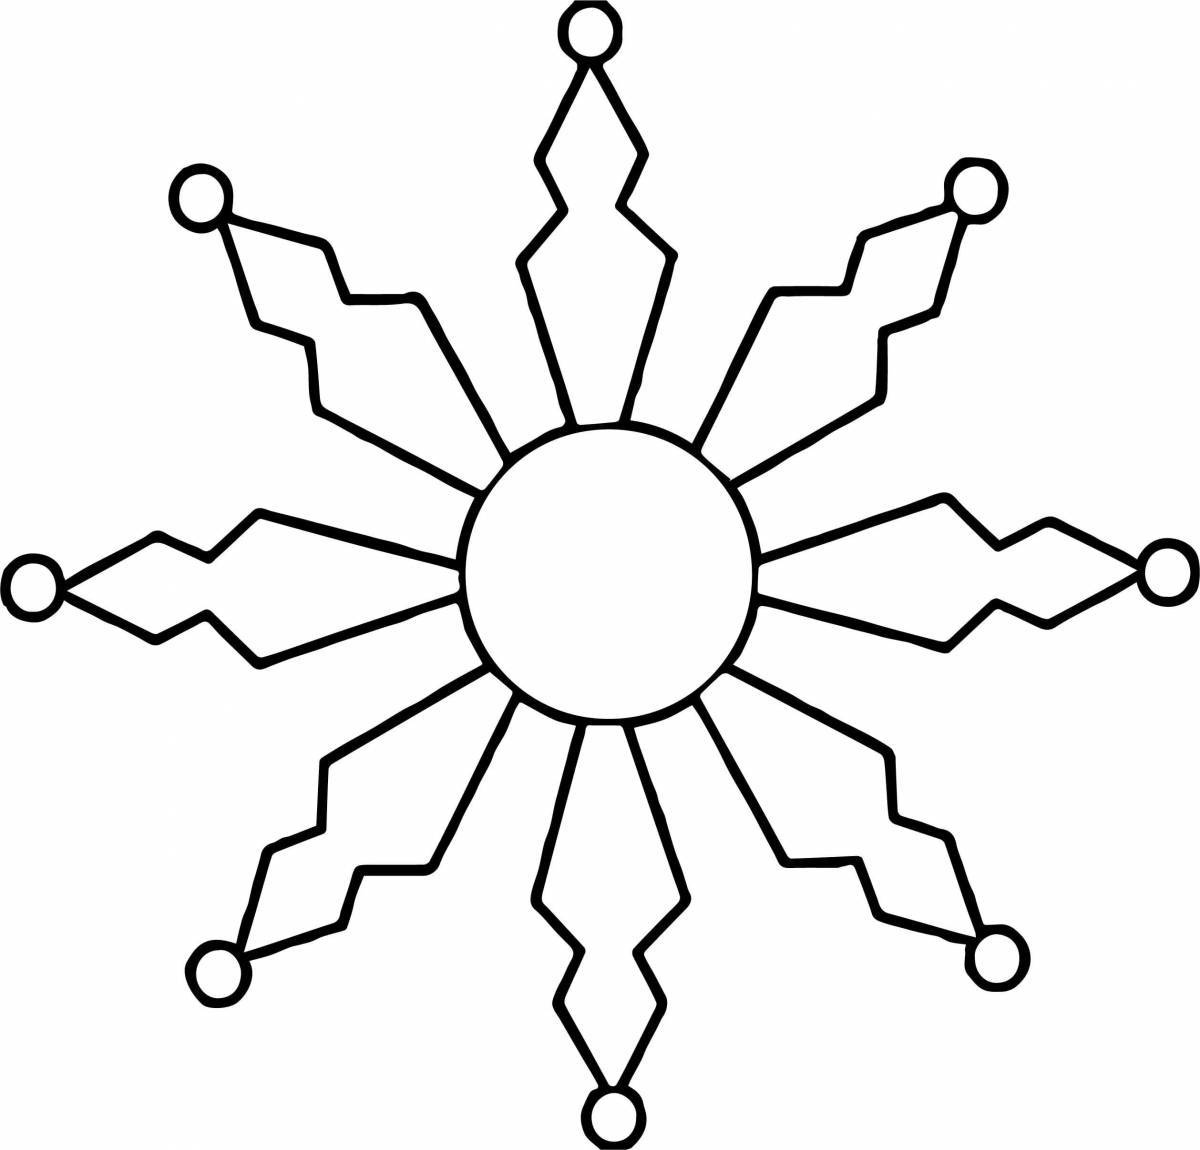 Cheerful coloring of a snowflake for children of 5-6 years